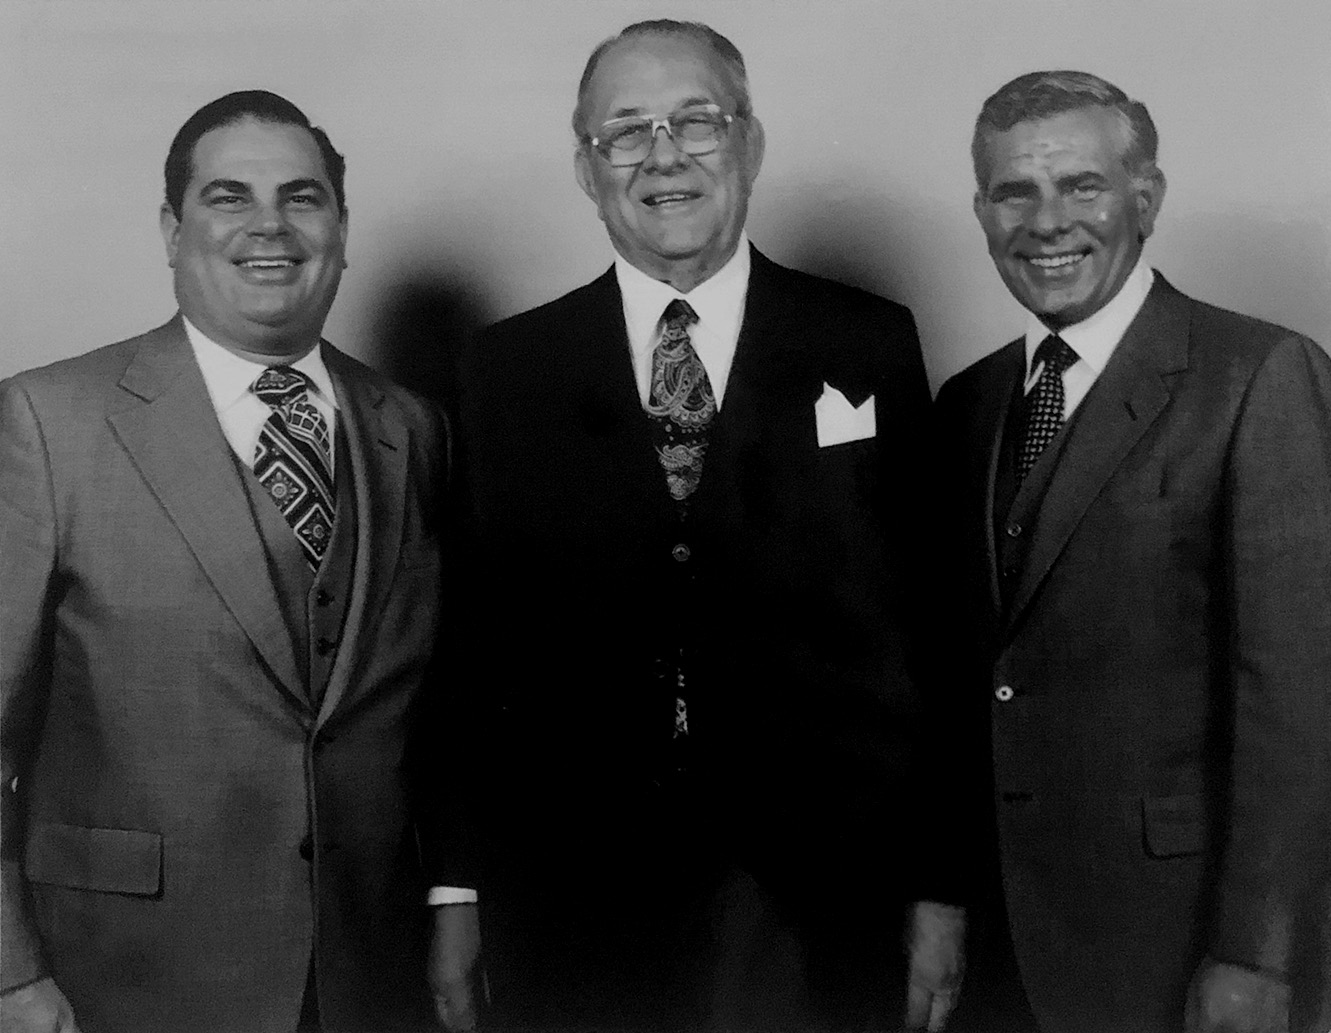  Arthur flanked by his two sons, Arthur Michael Wirtz Jr. and William (Bill) Wirtz 